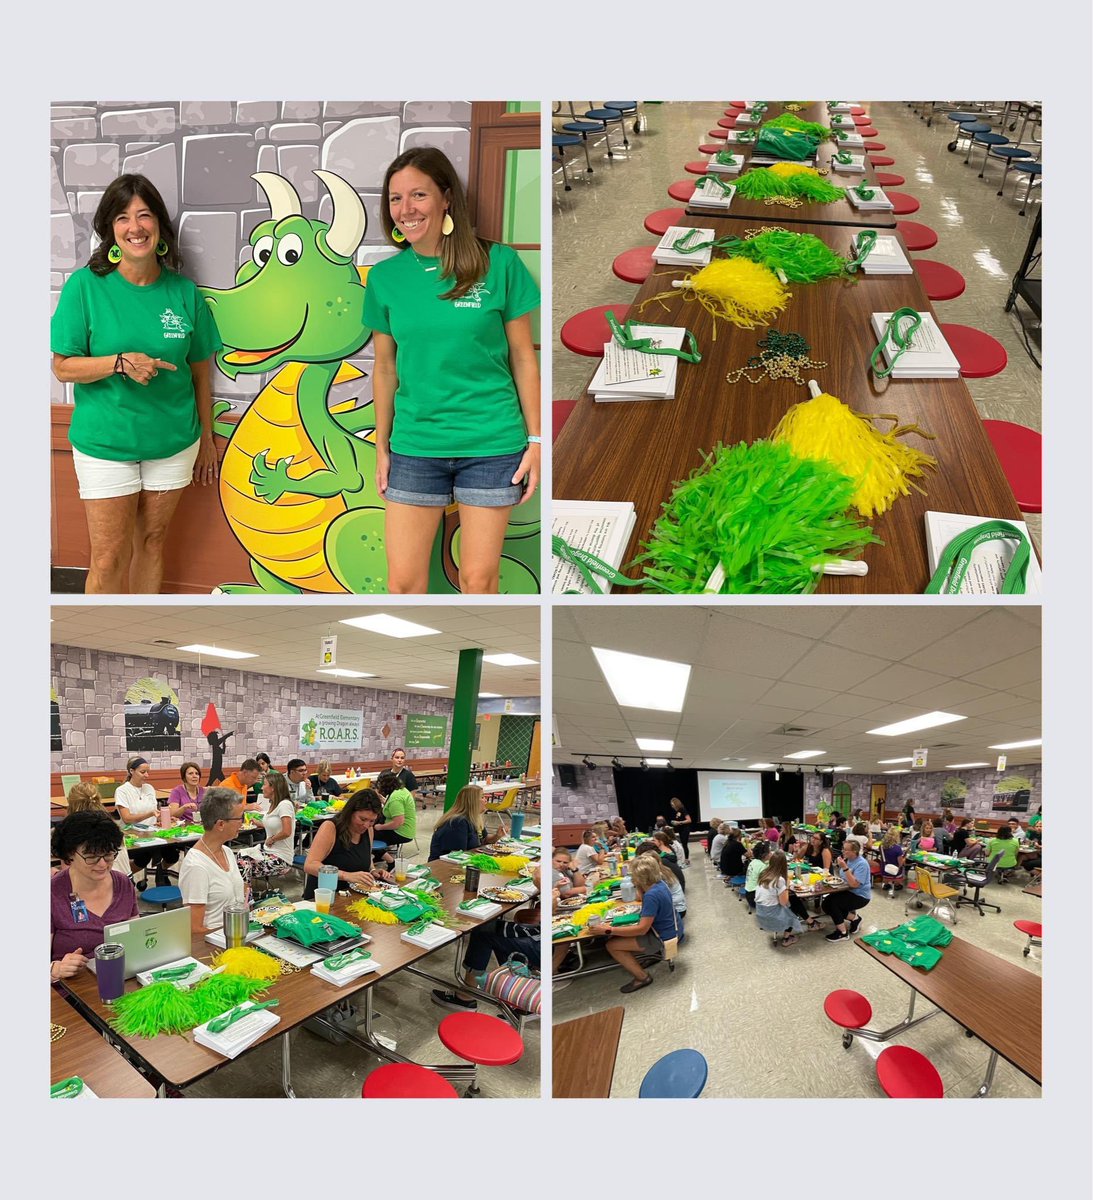 What a joy filled day! 💛💚Greenfield Staff - we love you!! #dontstopgrowing #bloom